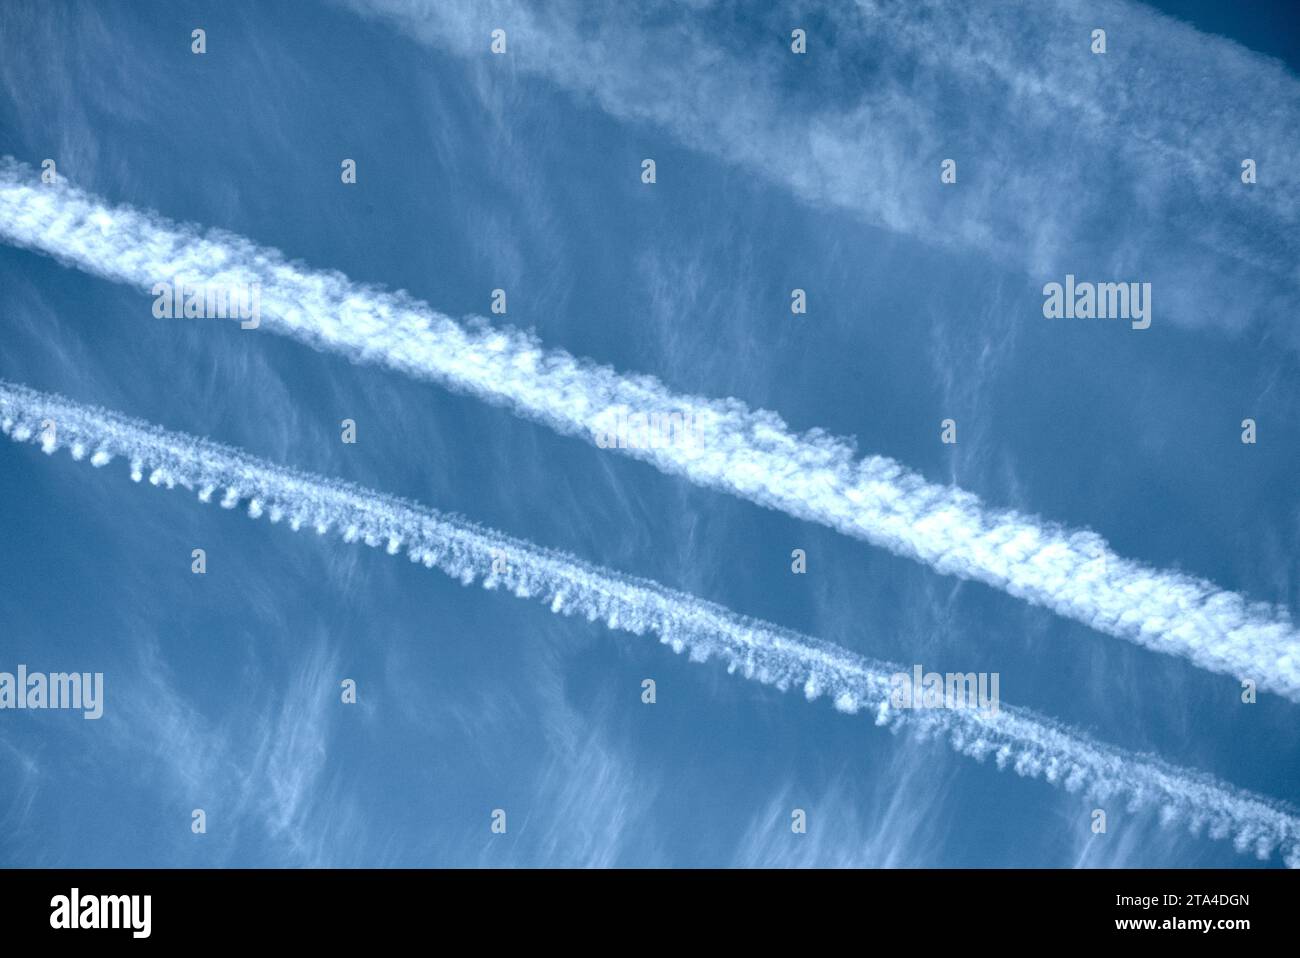 Chemtrails on a sunny day Stock Photo